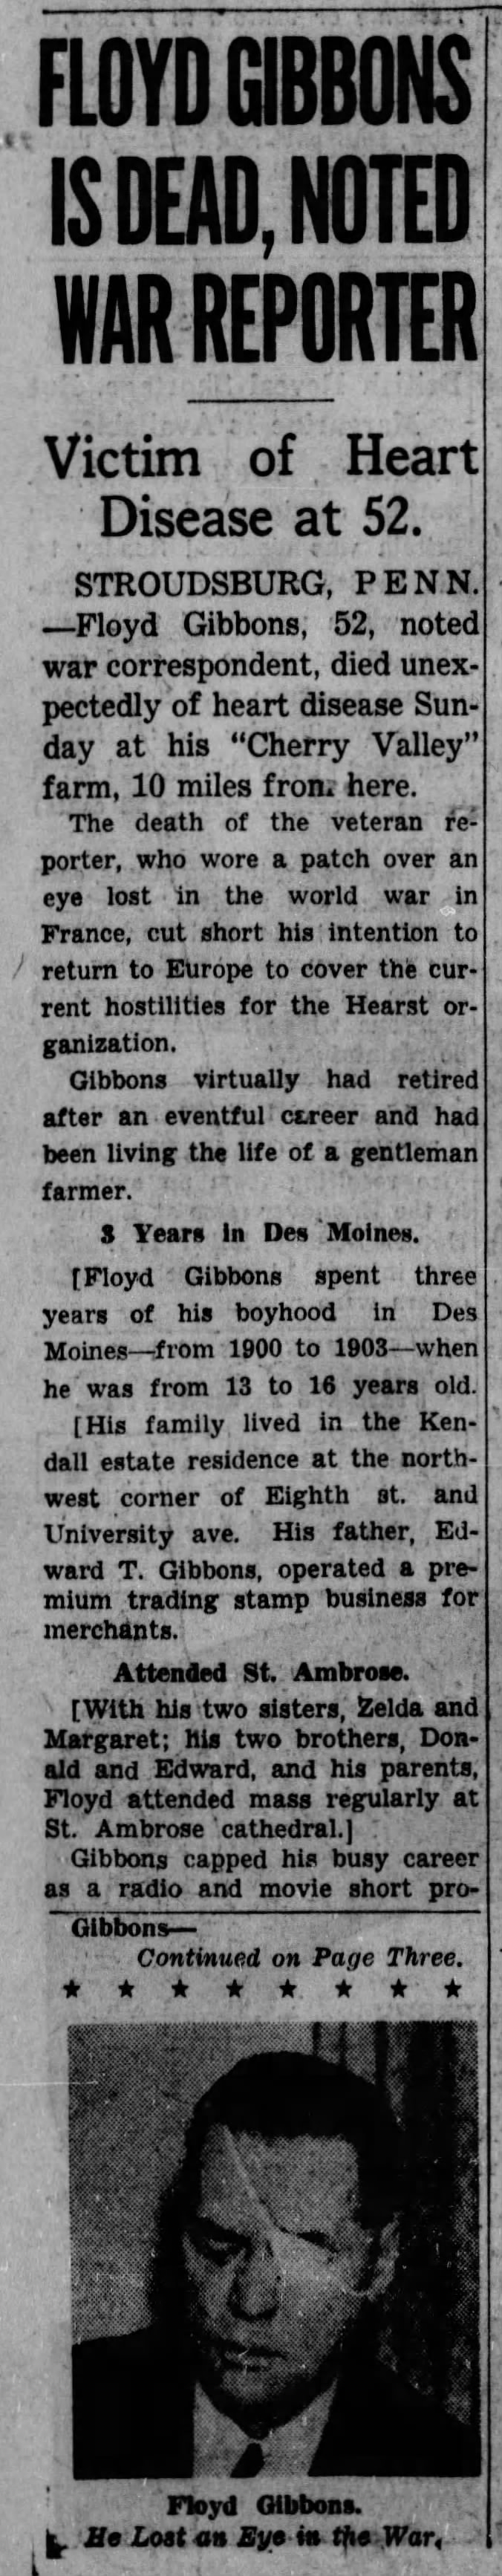 Floyd Gibbons Is Dead, Noted War Reporter; 25 Sep 1939; The Des Moines Register; 1